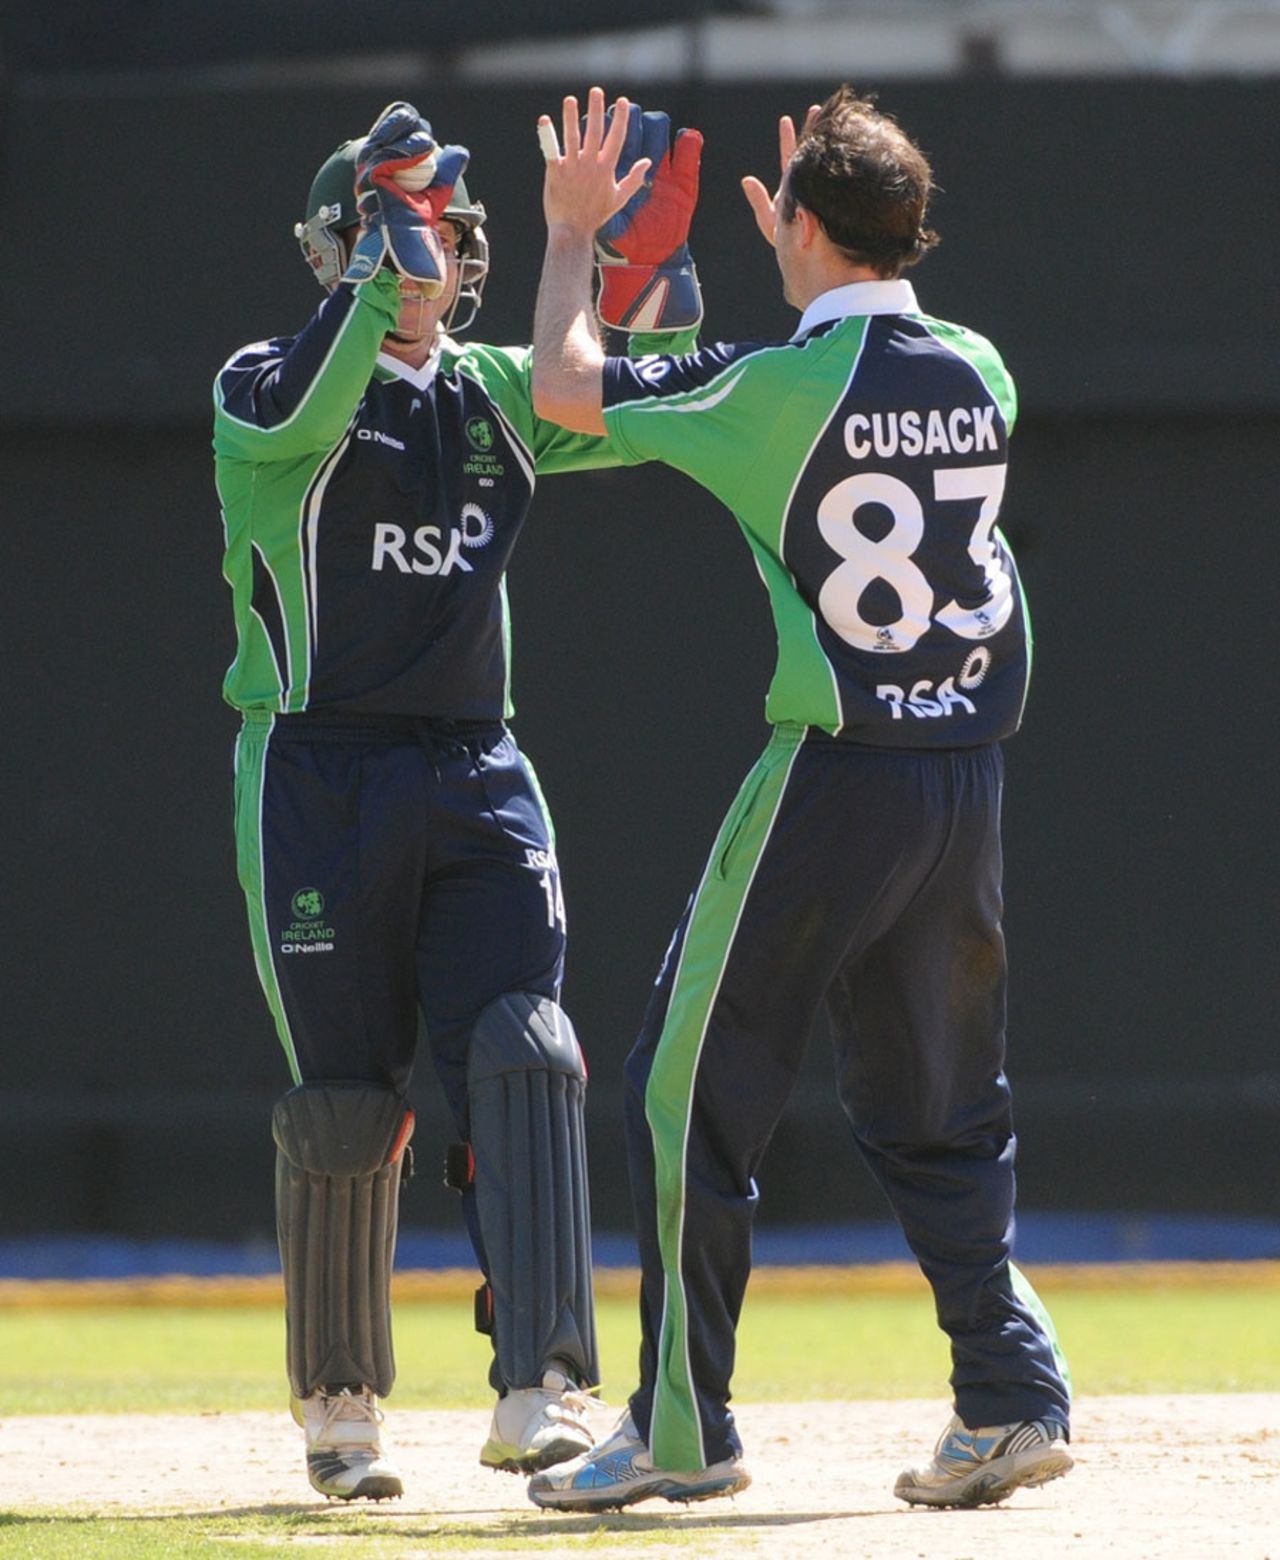 Alex Cusack and Gary Wilson combined for the first wicket, West Indies v Ireland, 2nd T20, Kingston, February 21, 2014